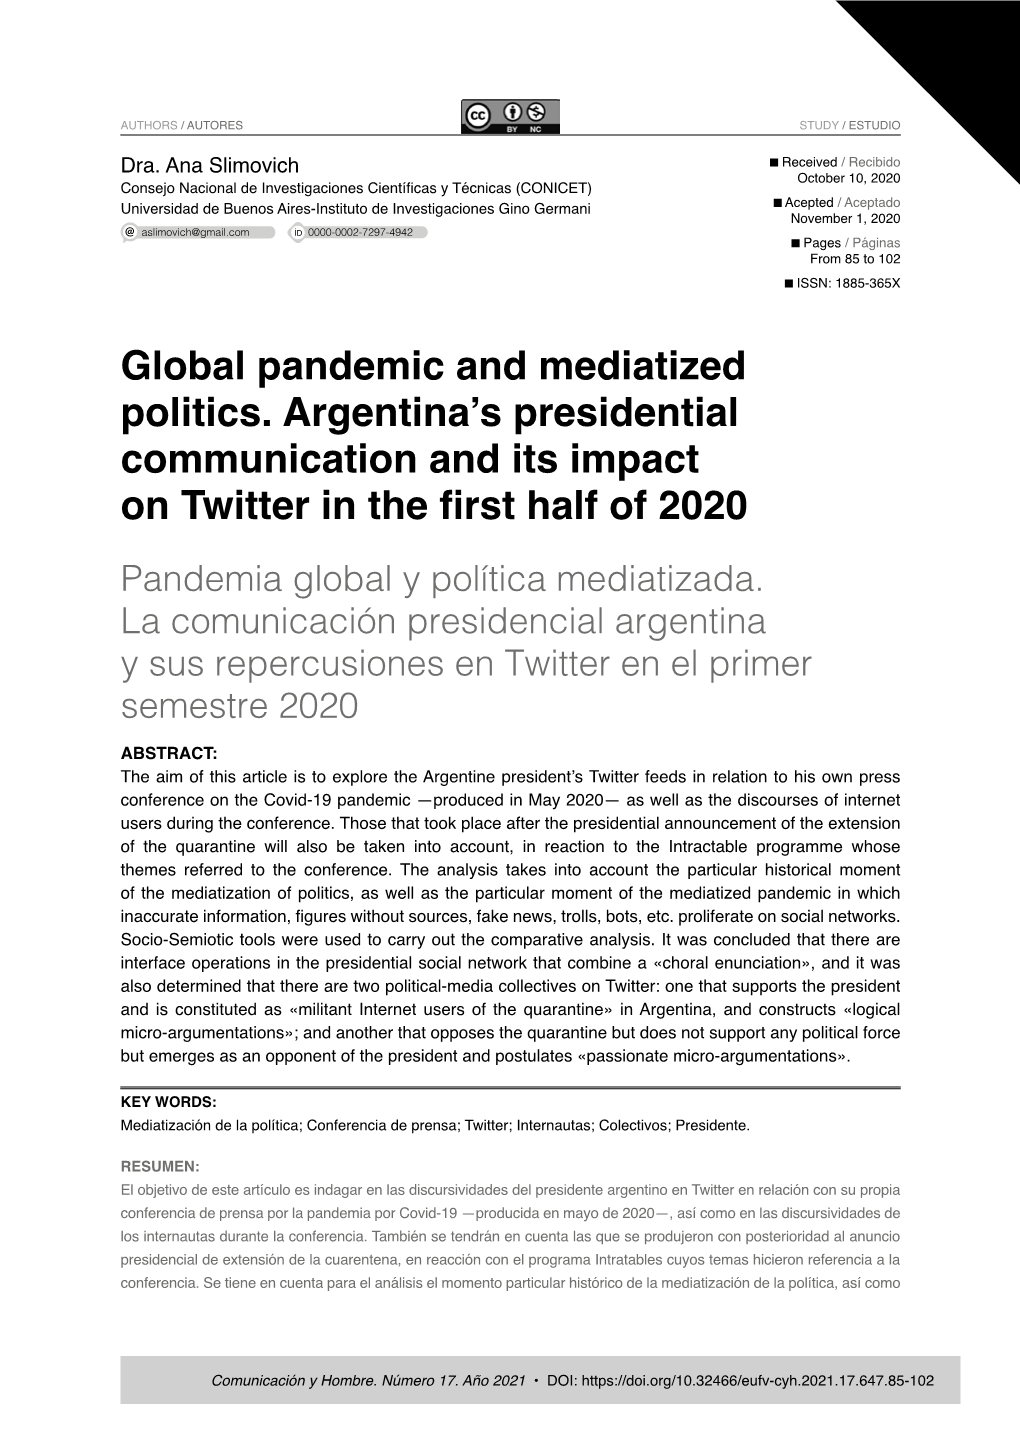 Global Pandemic and Mediatized Politics. Argentina's Presidential